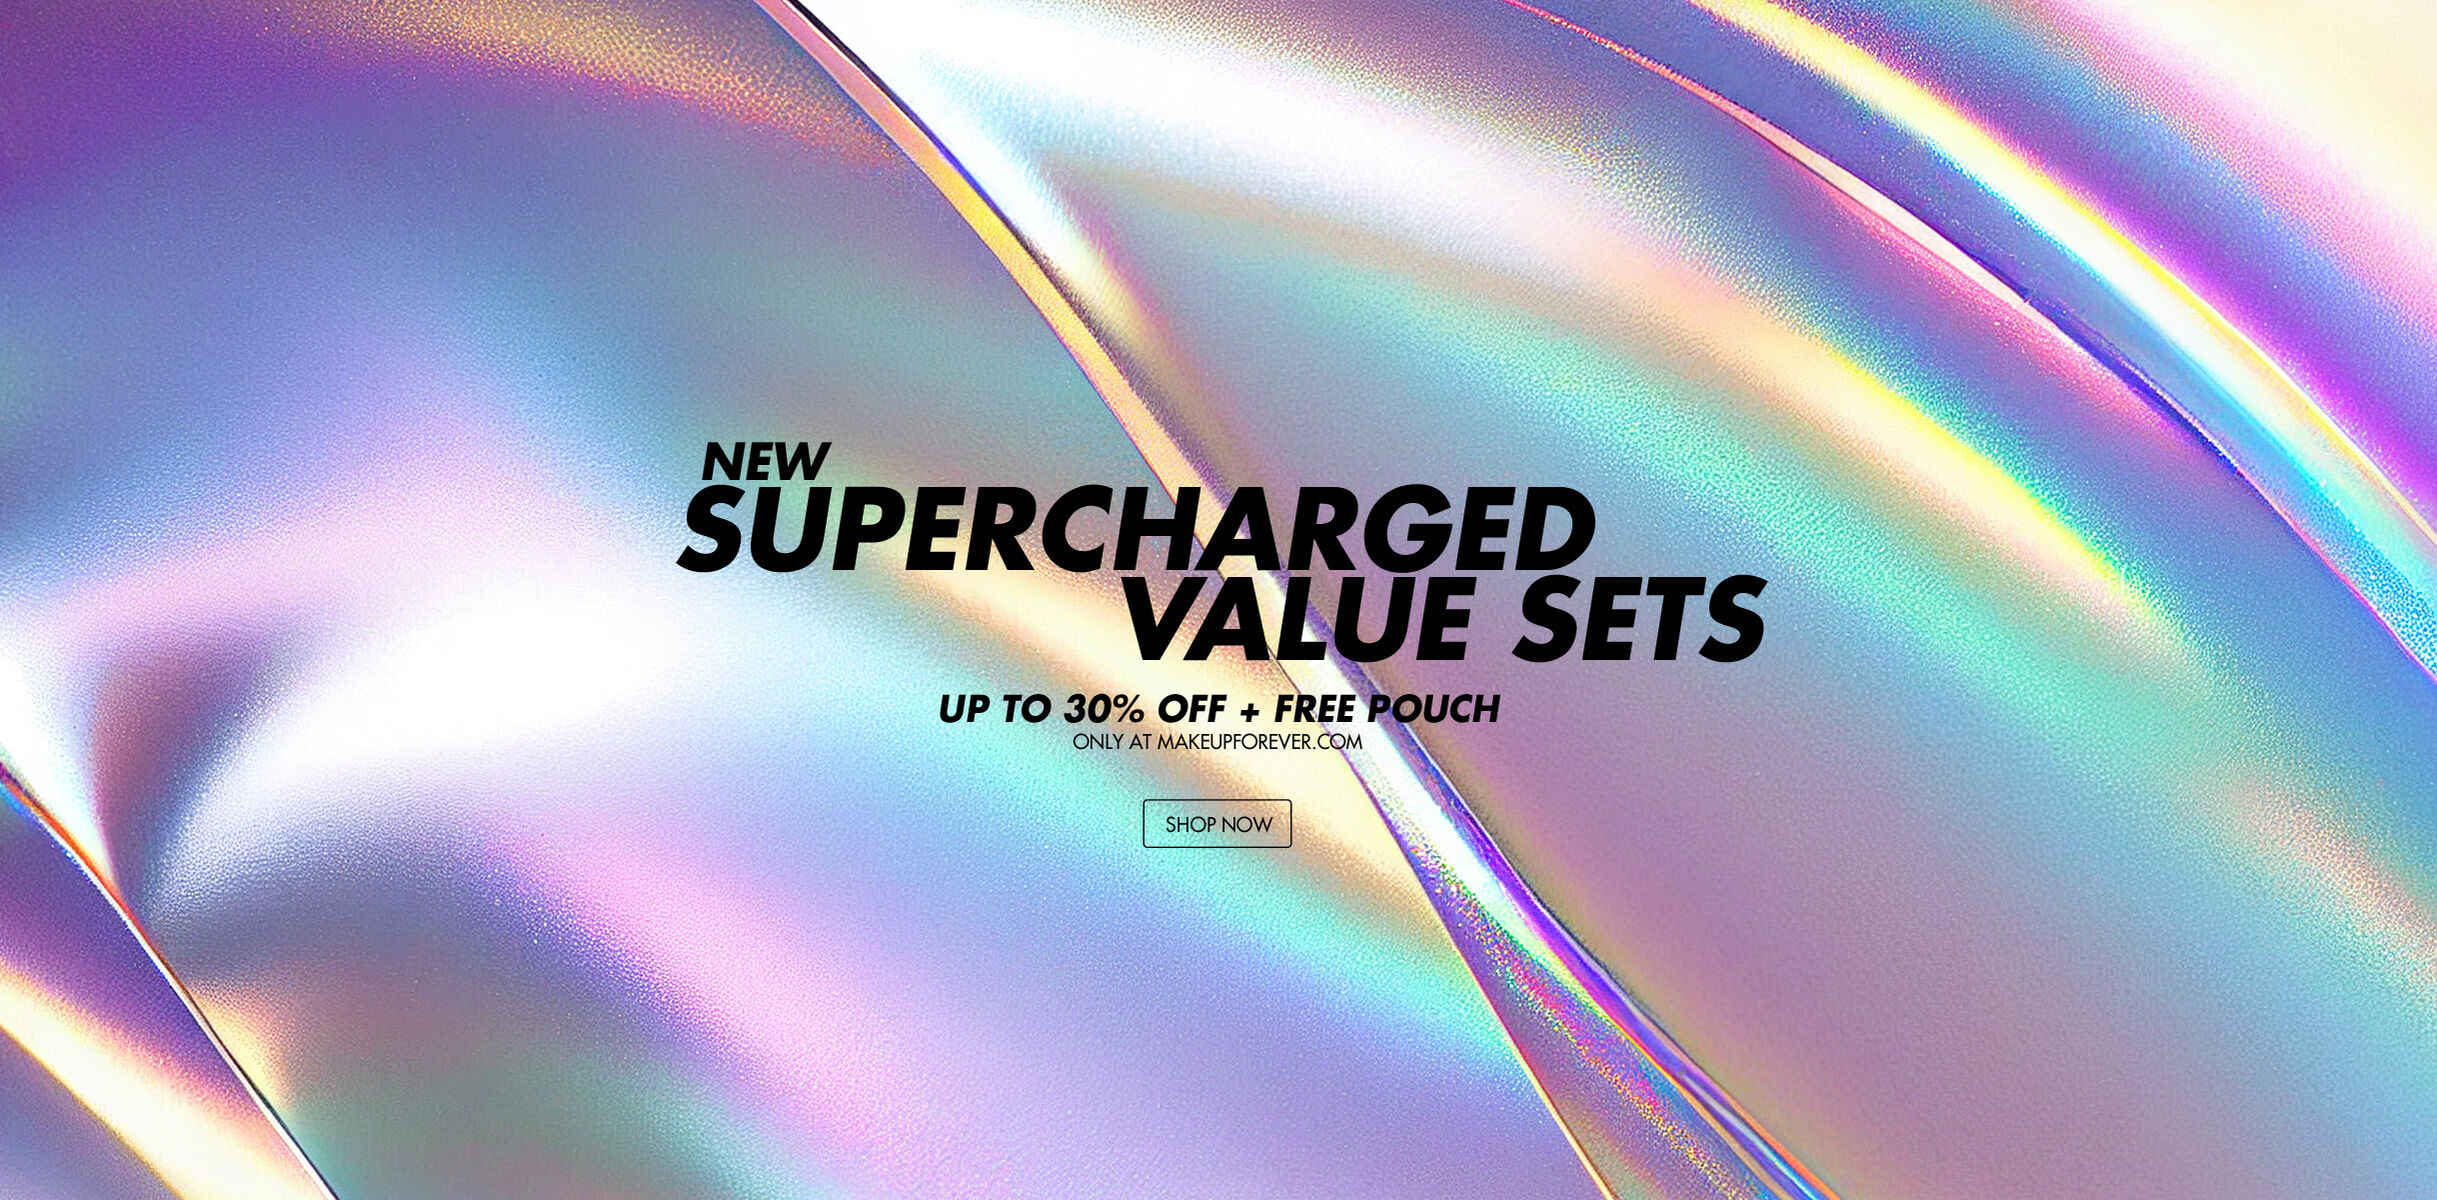 SUPERCHARGED VALUE SETS - UP TO 30% OFF + FREE POUCH